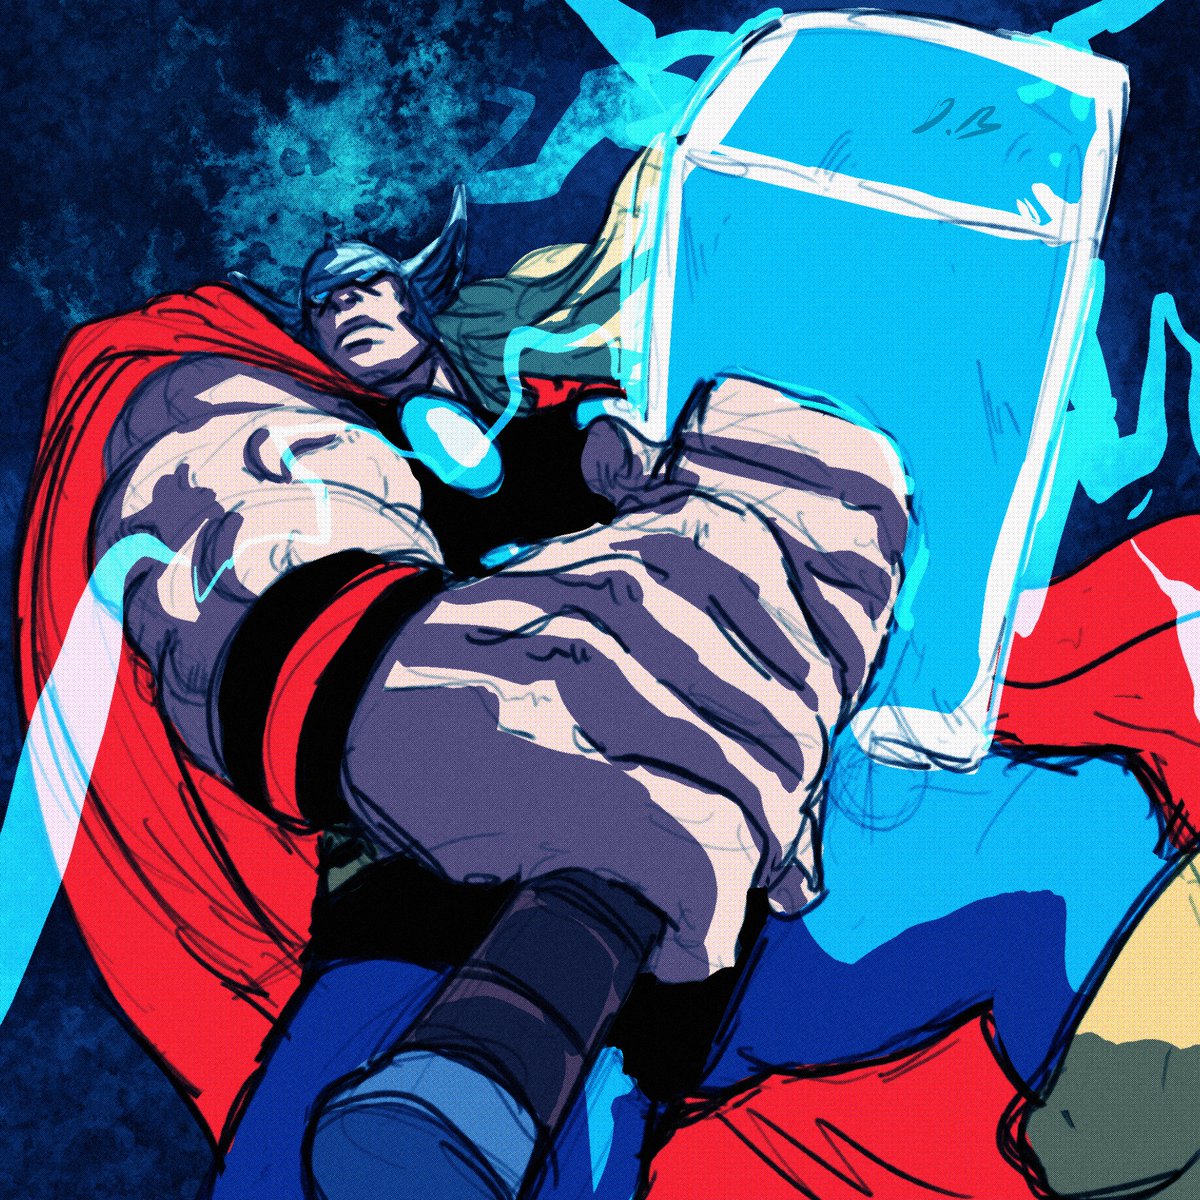 RT @DocileBread: The Mighty Thor

#marvel https://t.co/GQDrcN13oW